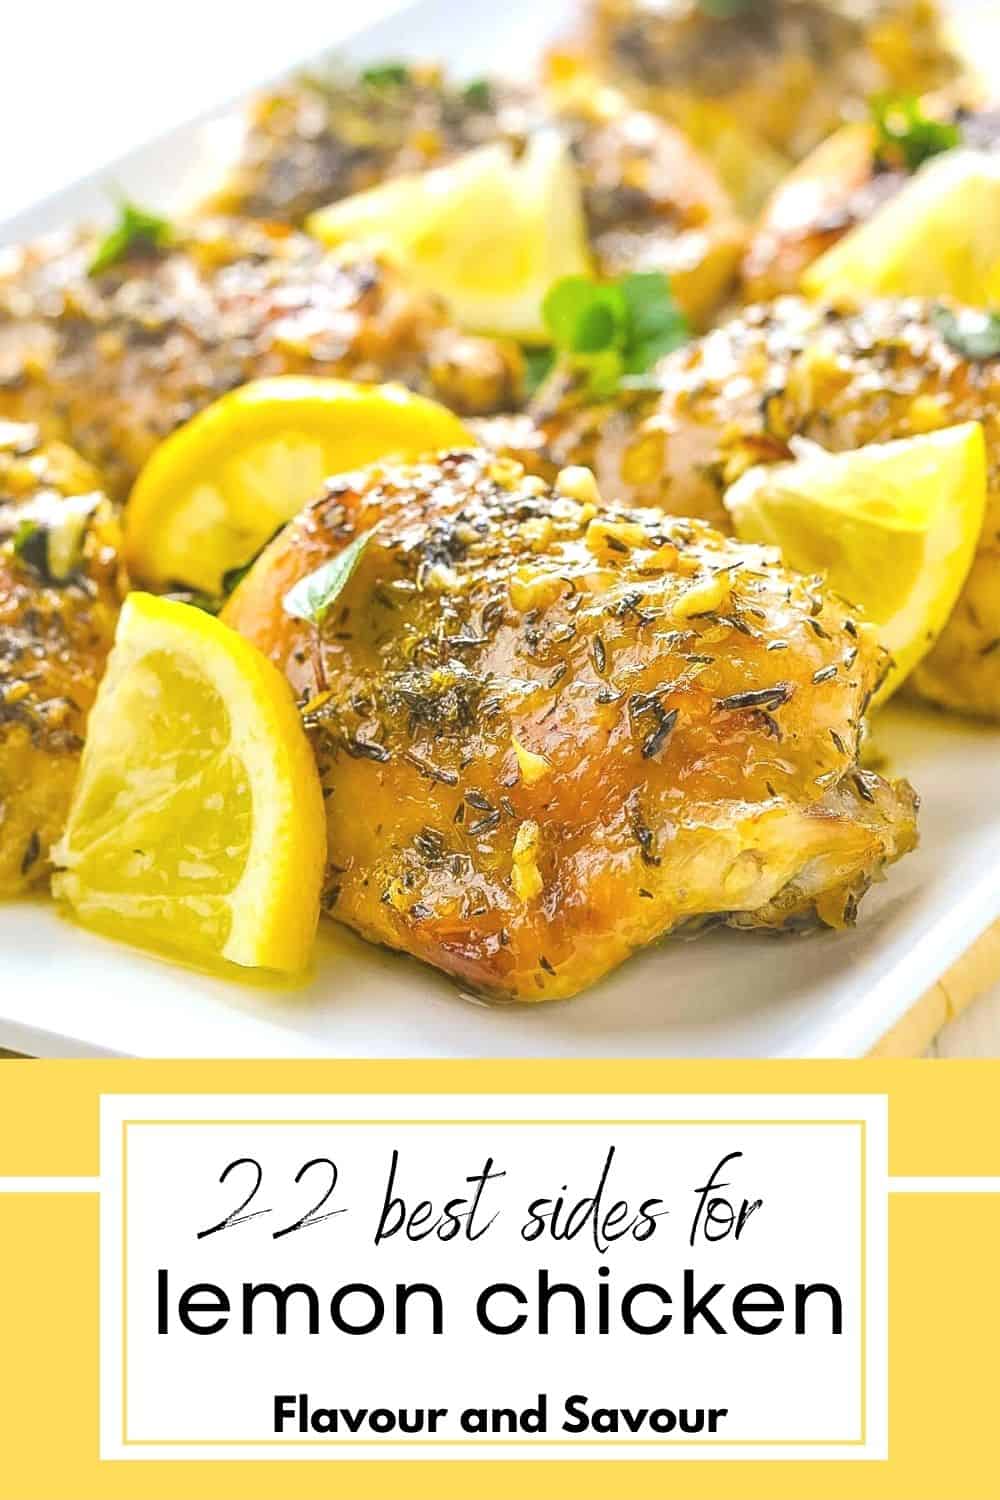 image with text for 22 best sides for lemon chicken.